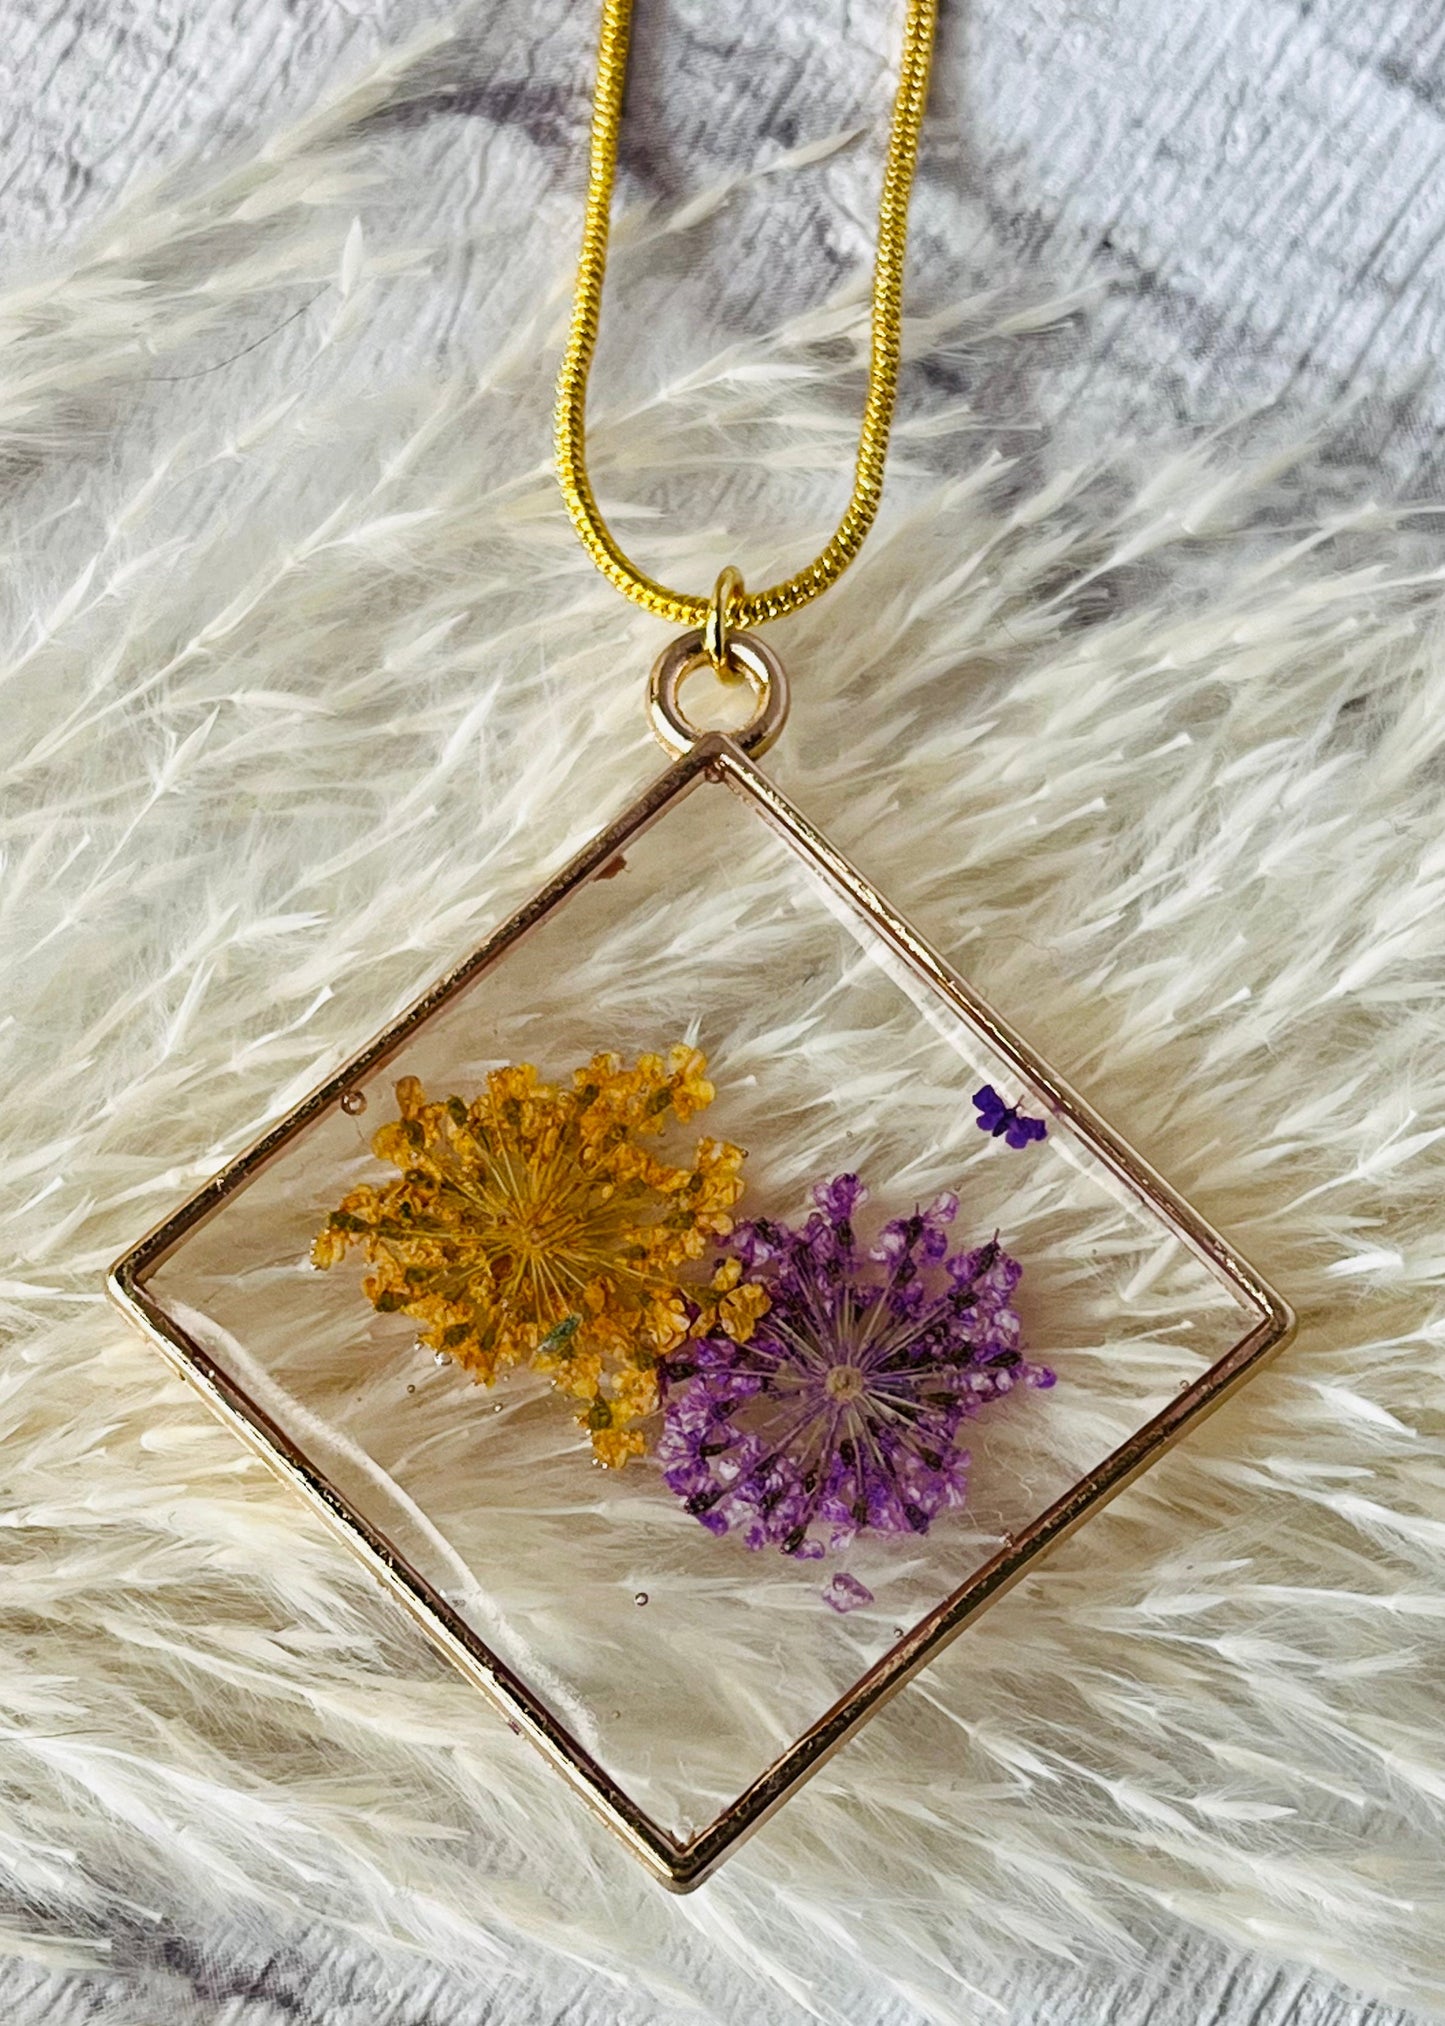 Handmade Real Dried Pressed Flower Gold Pendant Necklace